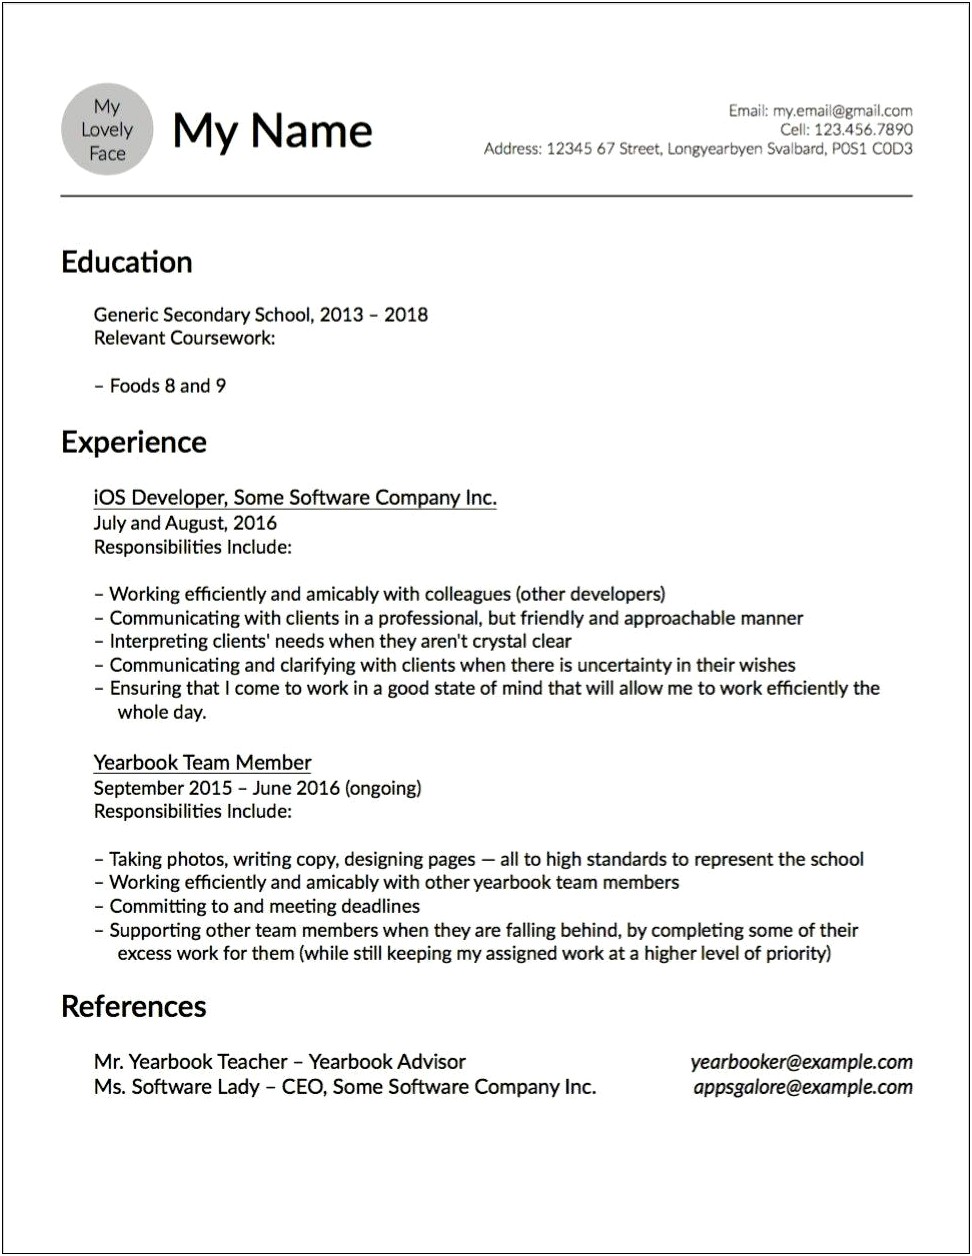 Resume Level Of Education For High School